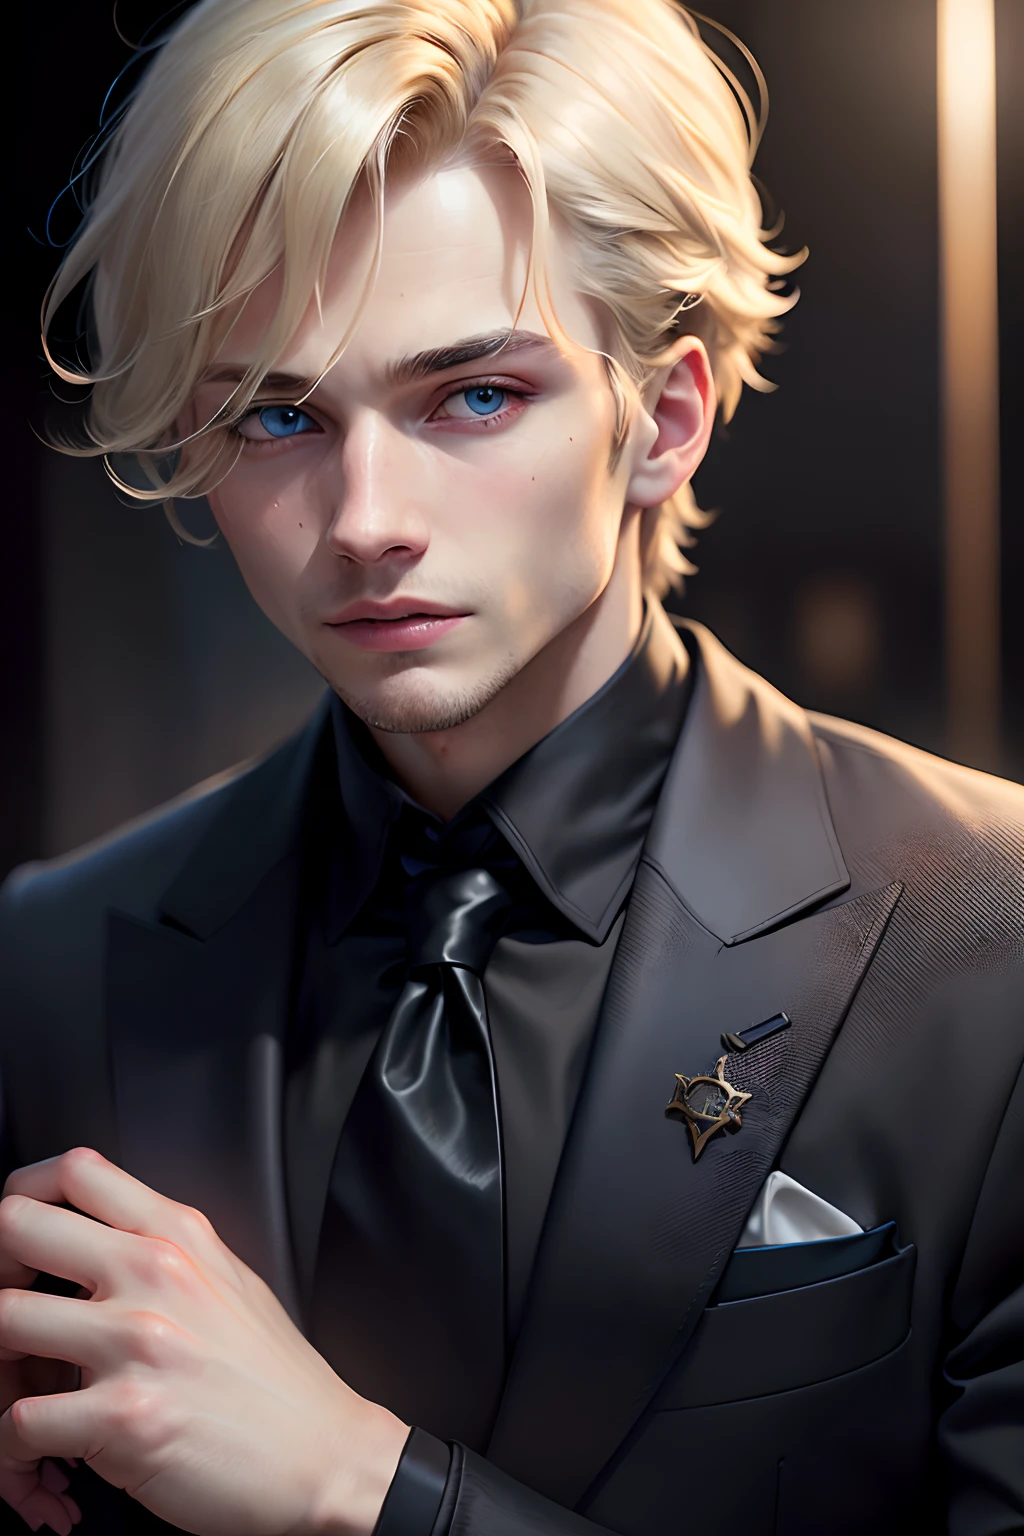 (masuter piece,Best Quality,Ultra-detailed), (A detailed face), 1boy, A young man who left his boyhood behind,(front-facing view),(Photorealsitic:1.2),(side lights,Beautiful Eyes of Details:1.2),Blonde colored hair,Face focus,Black suit,Black jacket,Black necktie,Vampires,Confident,10 Billion Man,blue eyess,Mafioso,Secret associations